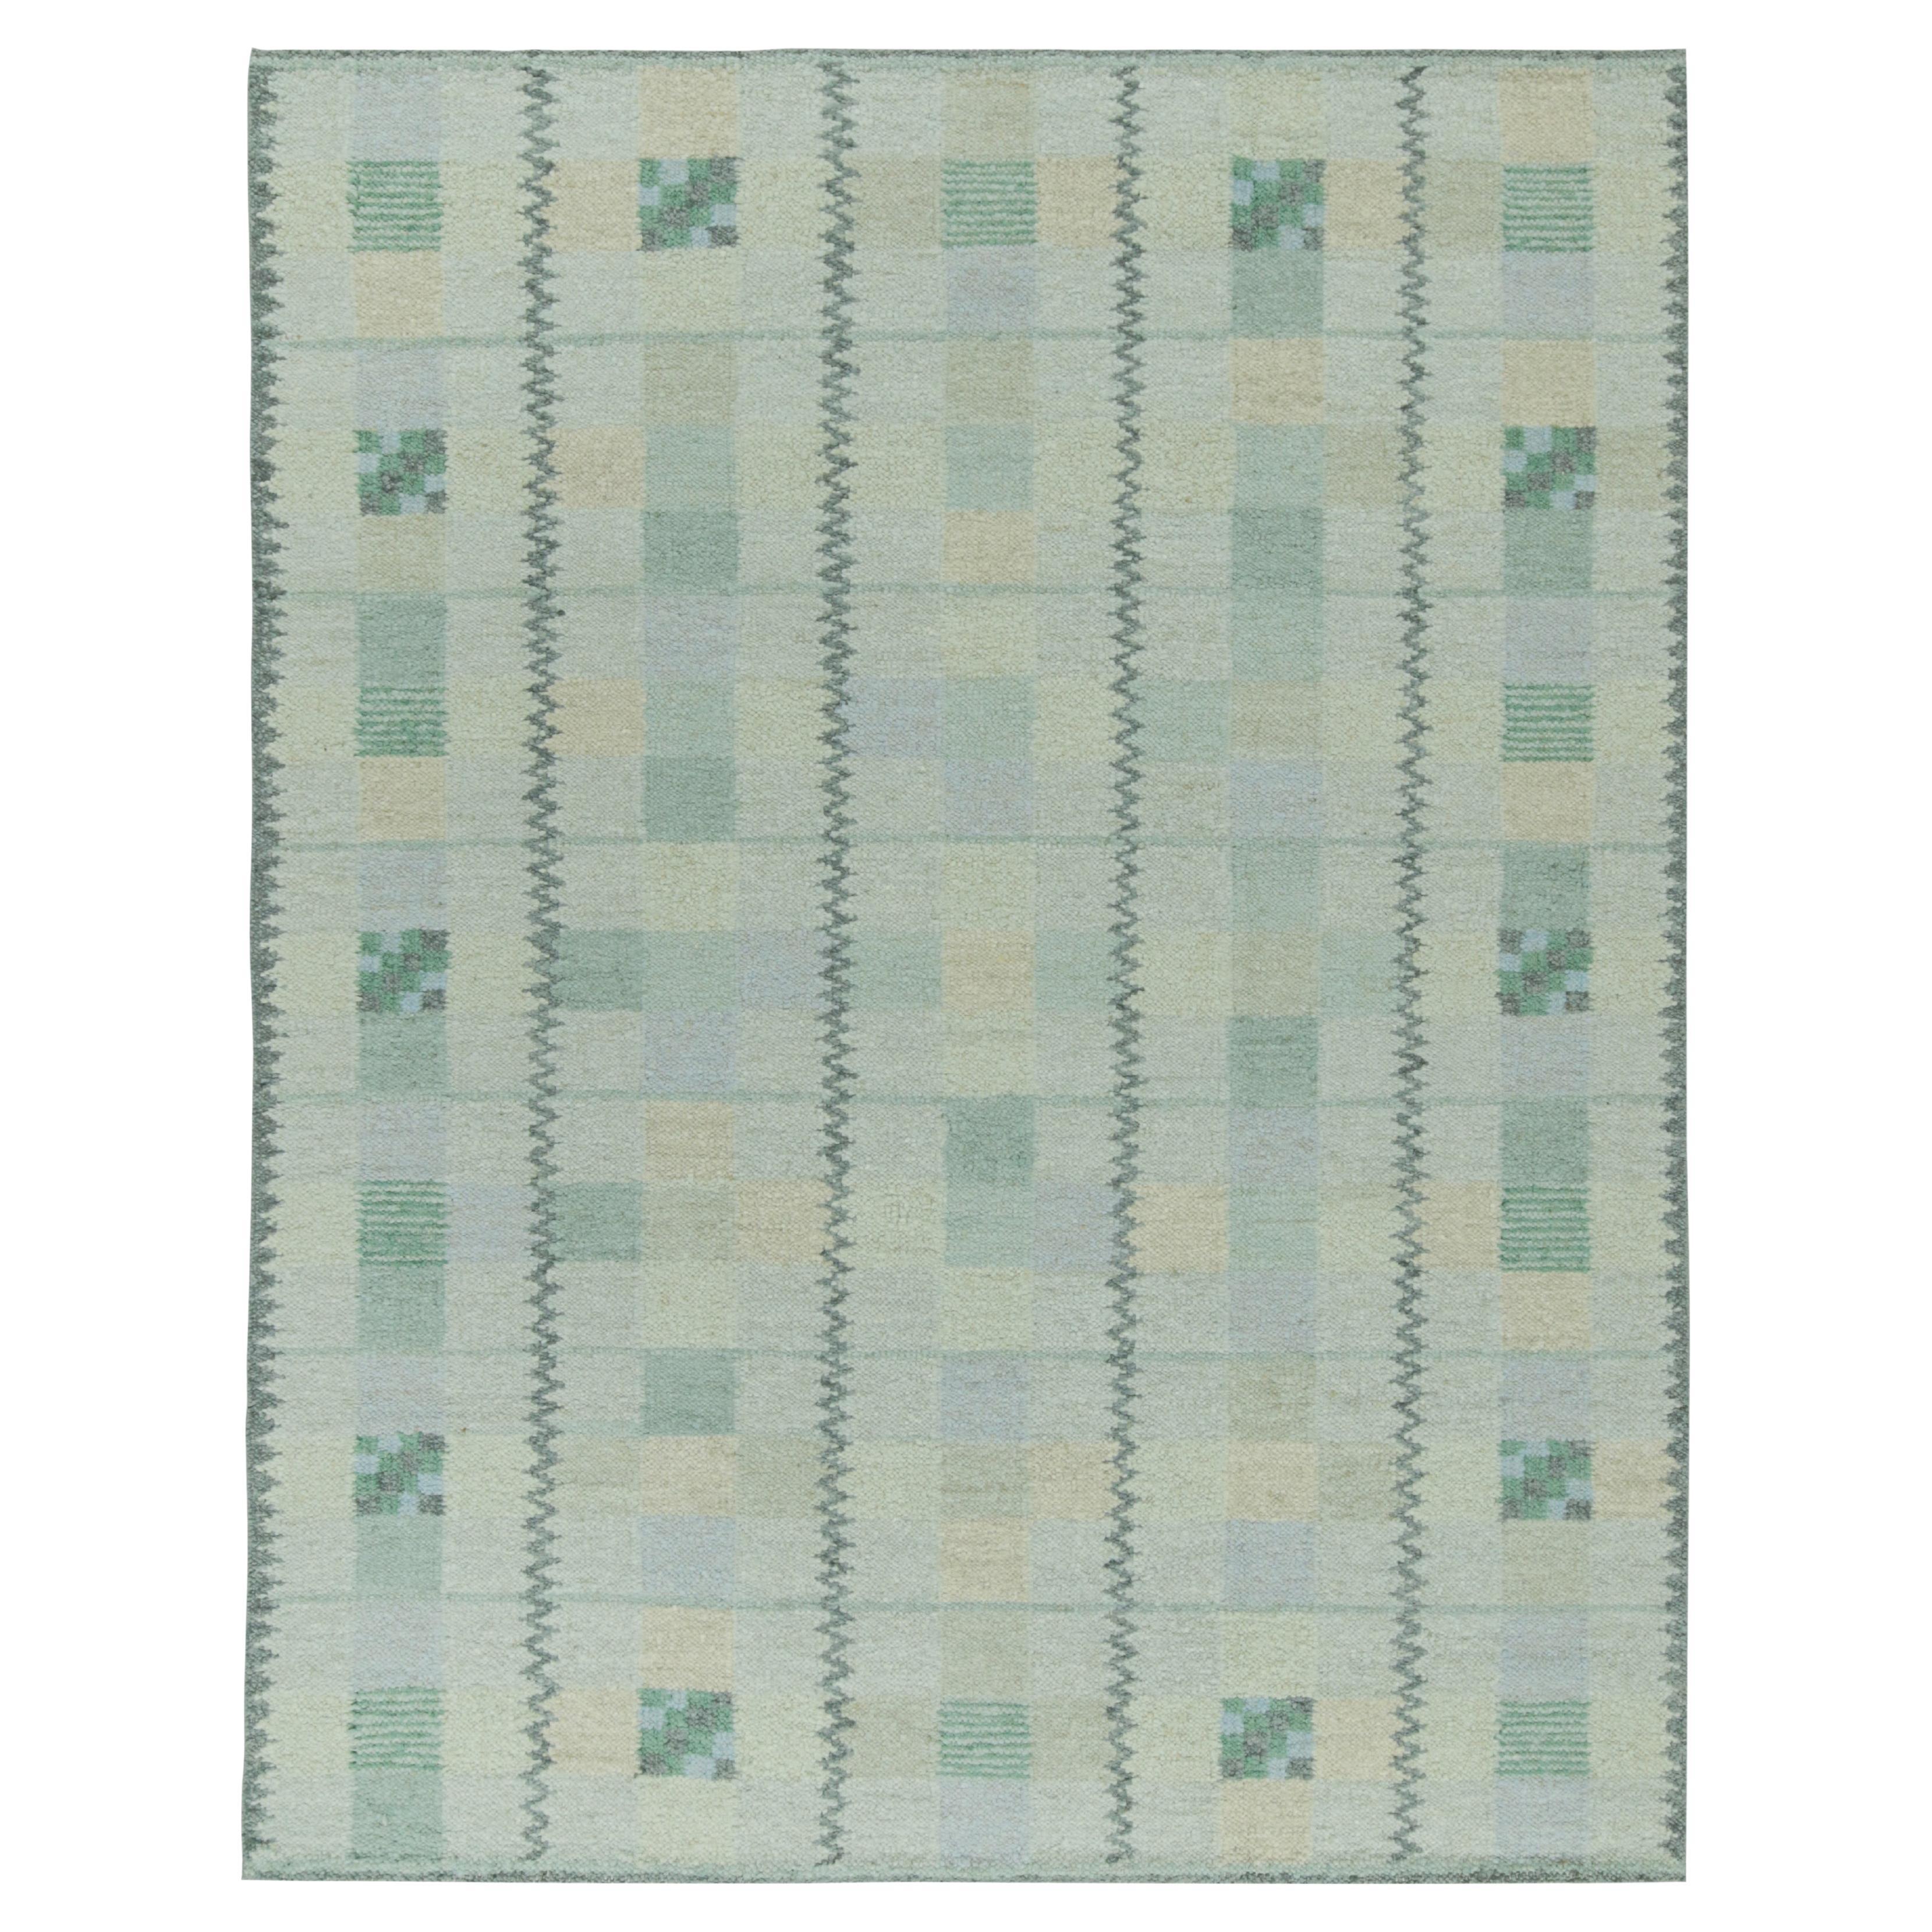 Rug & Kilim’s Scandinavian Style Kilim with Patterns in Grey, Blue & Green